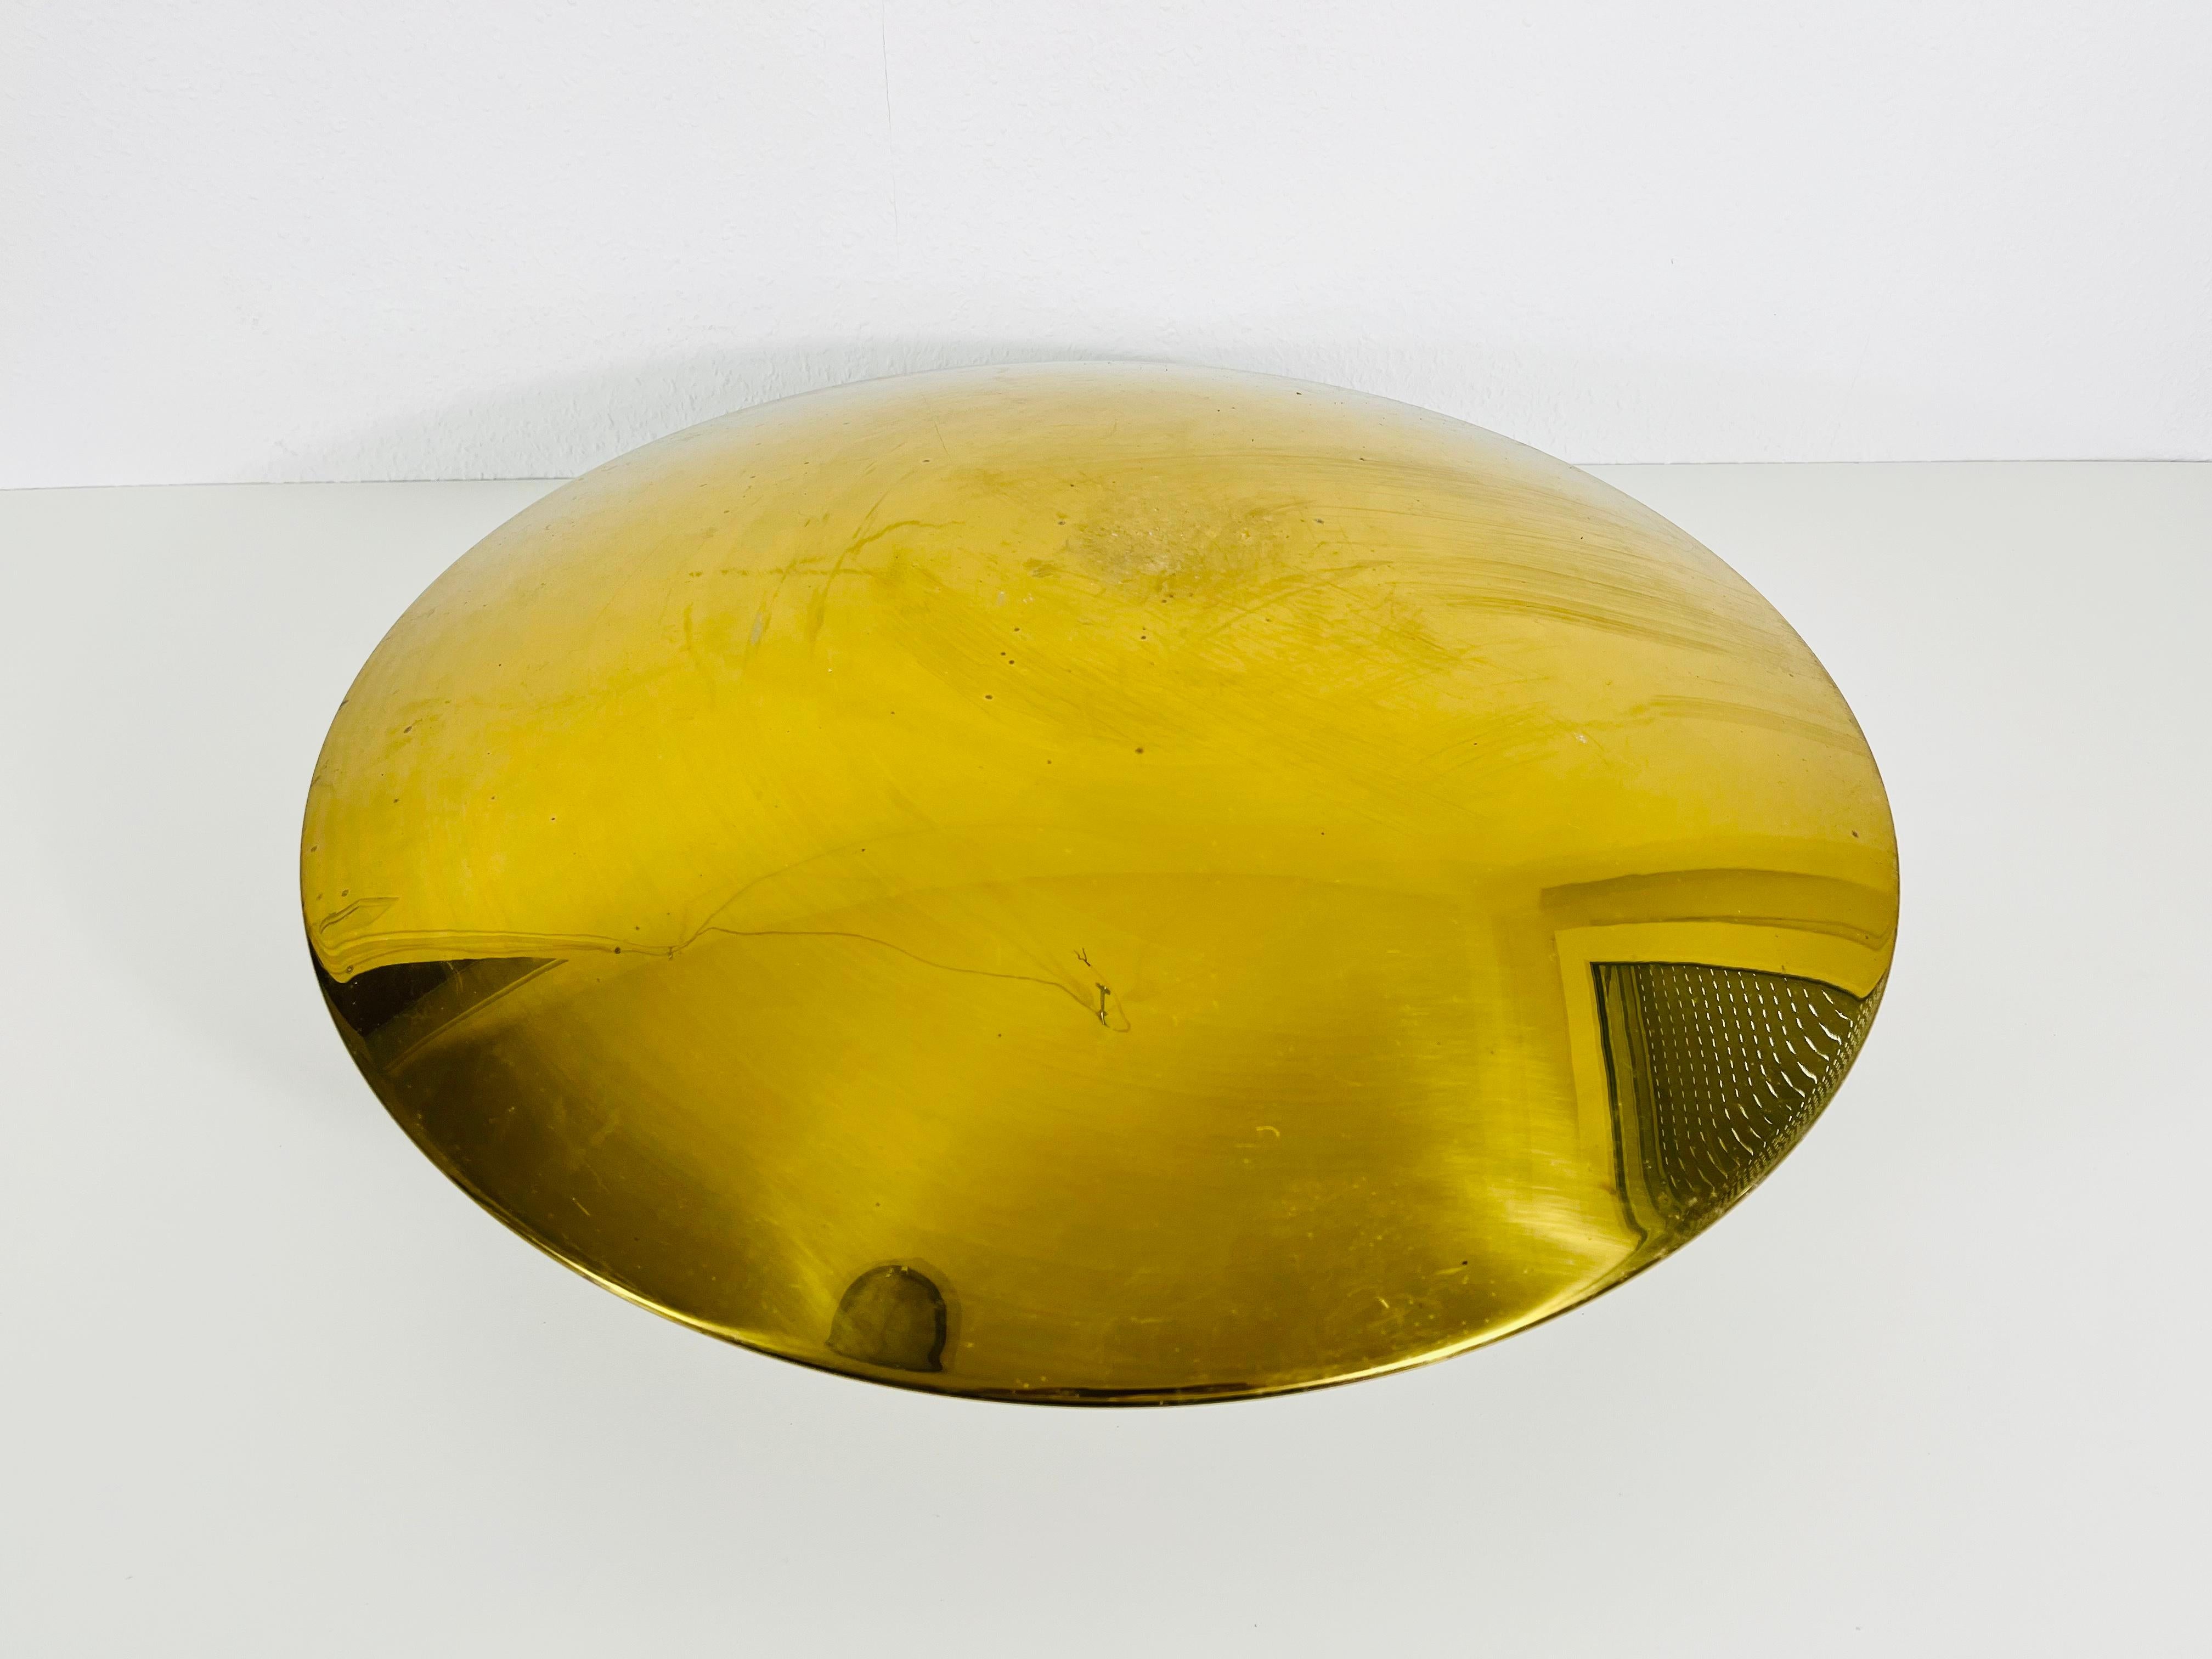 A midcentury flush mount by Florian Schulz made in Germany in the 1960s. It is fascinating with its round gilt brass shade. 

Measurements:

Height 20 cm

Diameter 54 cm

The light requires five E27 light bulbs. Good vintage condition. Works